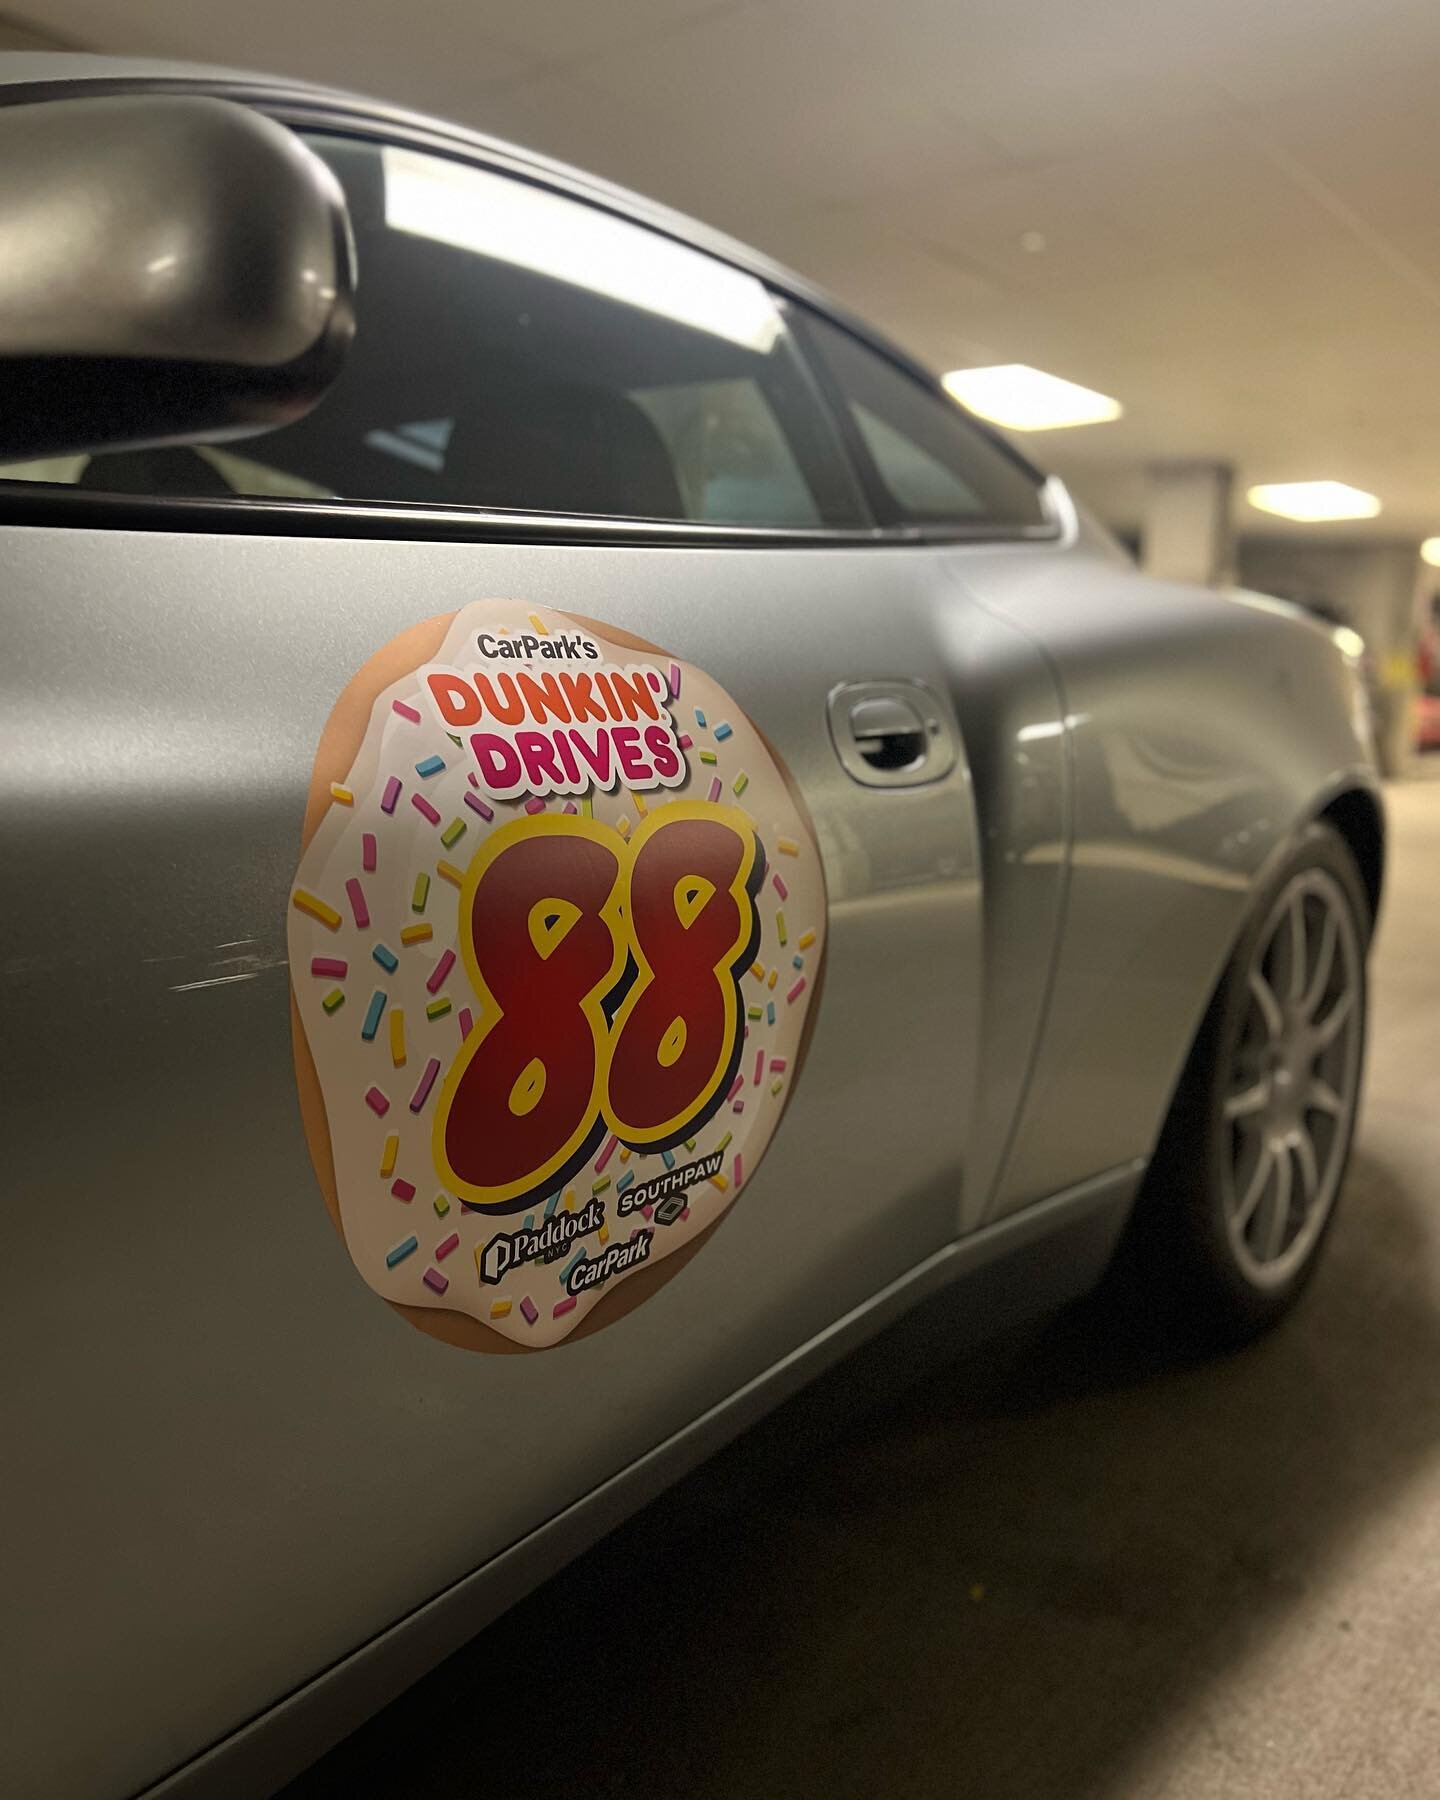 Wondering where you can pick up numbers and stickers for #DunkinDrives on May 6? They&rsquo;ll be at the following locations: Paddock 550 W550, Sunday Motor Cafe, and the following Dunkin&rsquo;s: Suffern, Warwick, Wingdale and Hopewell Jct. We figur